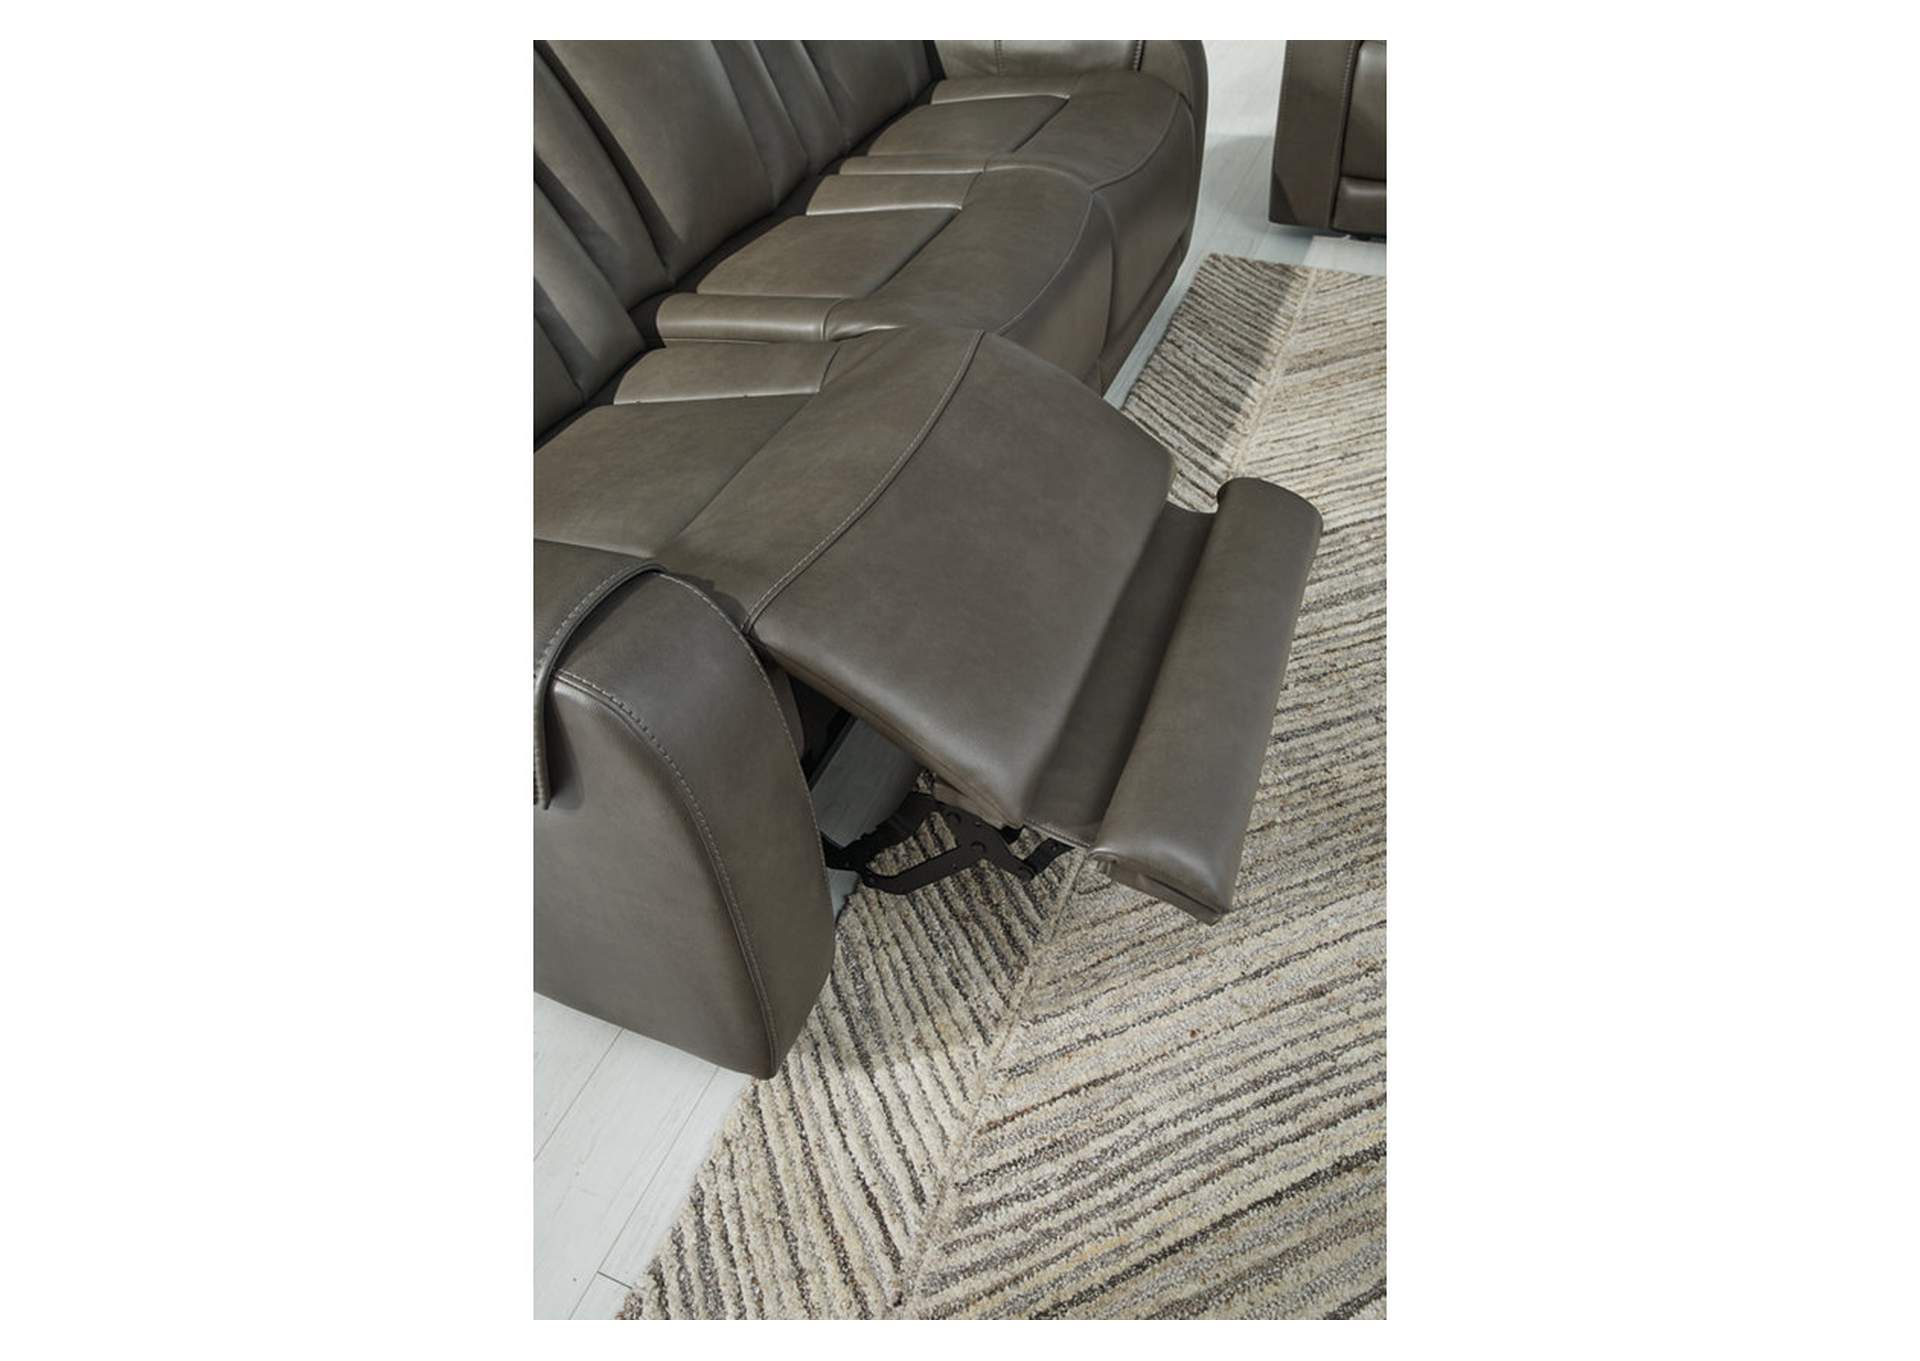 Card Player Power Reclining Sofa,Signature Design By Ashley